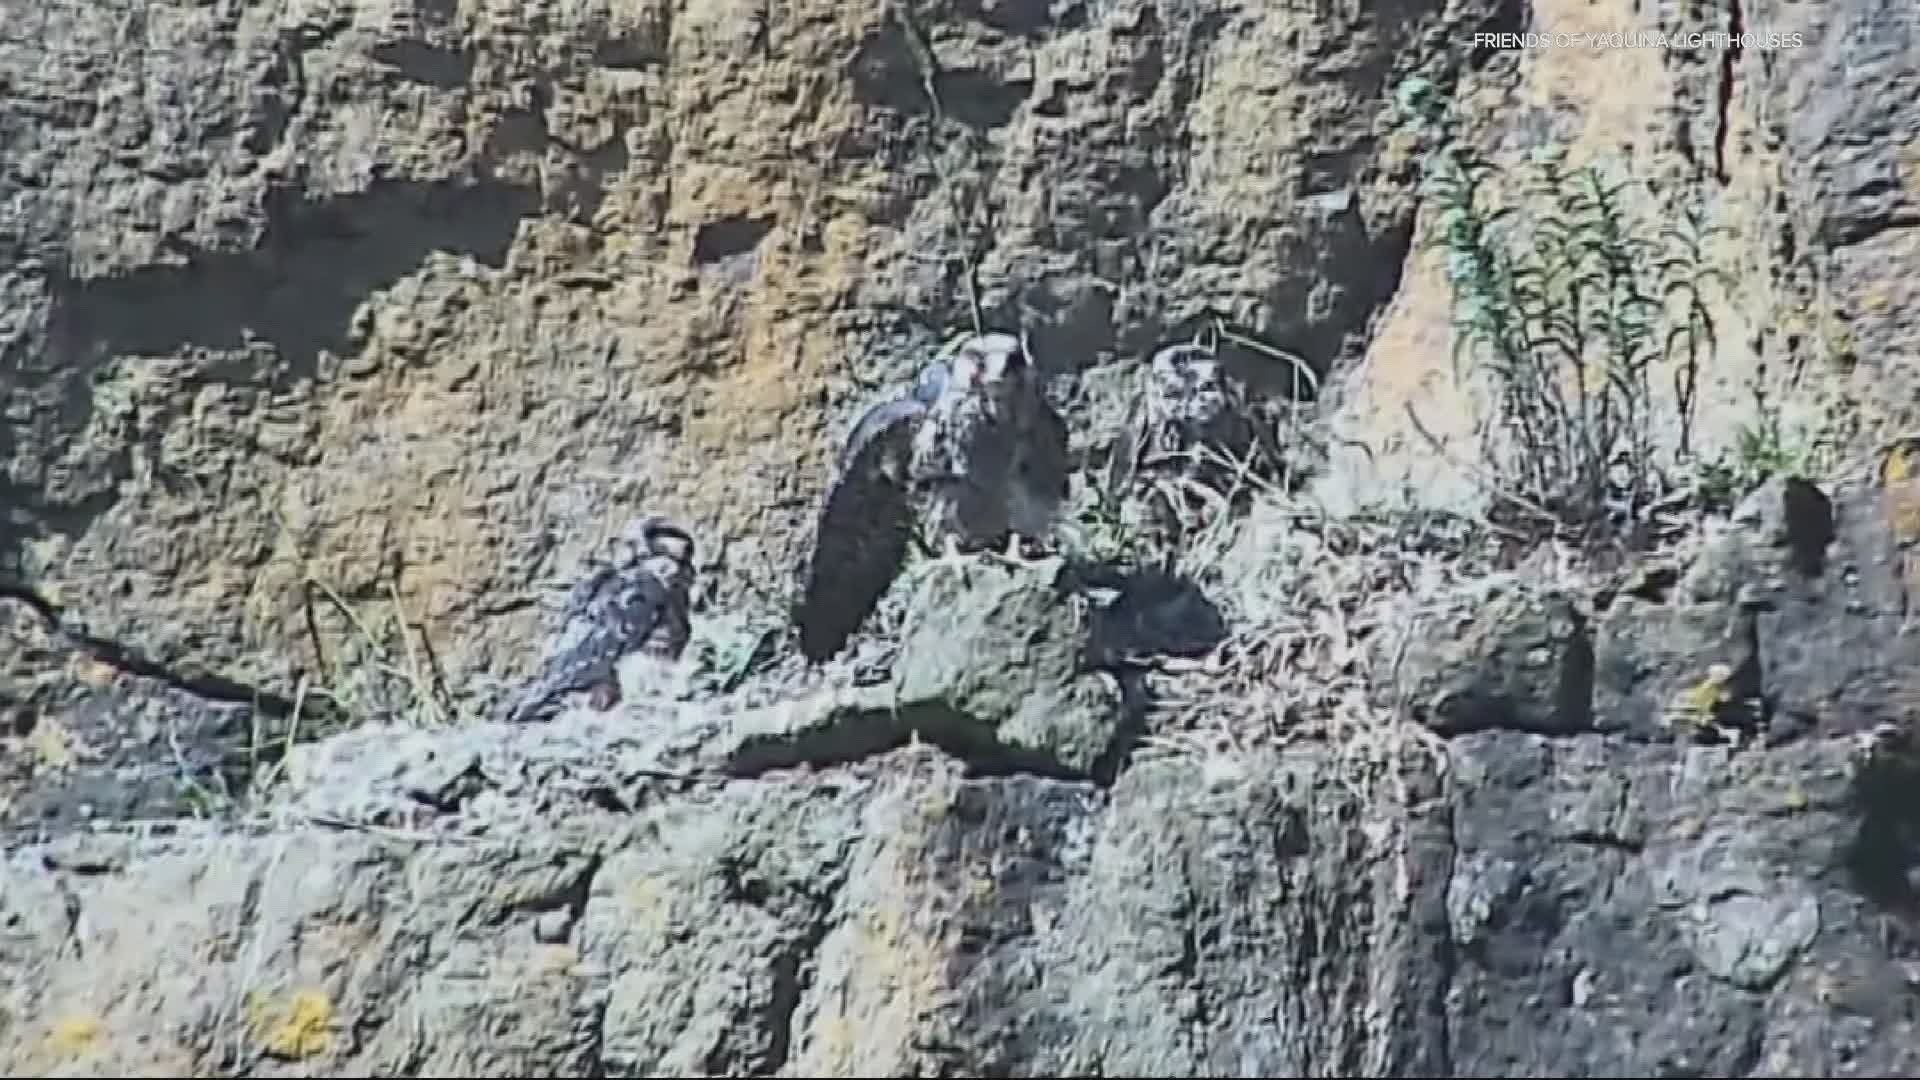 A group of bird watchers in Newport have been keeping an eye on a falcons nest that's been filled with chicks that are trying to survive.